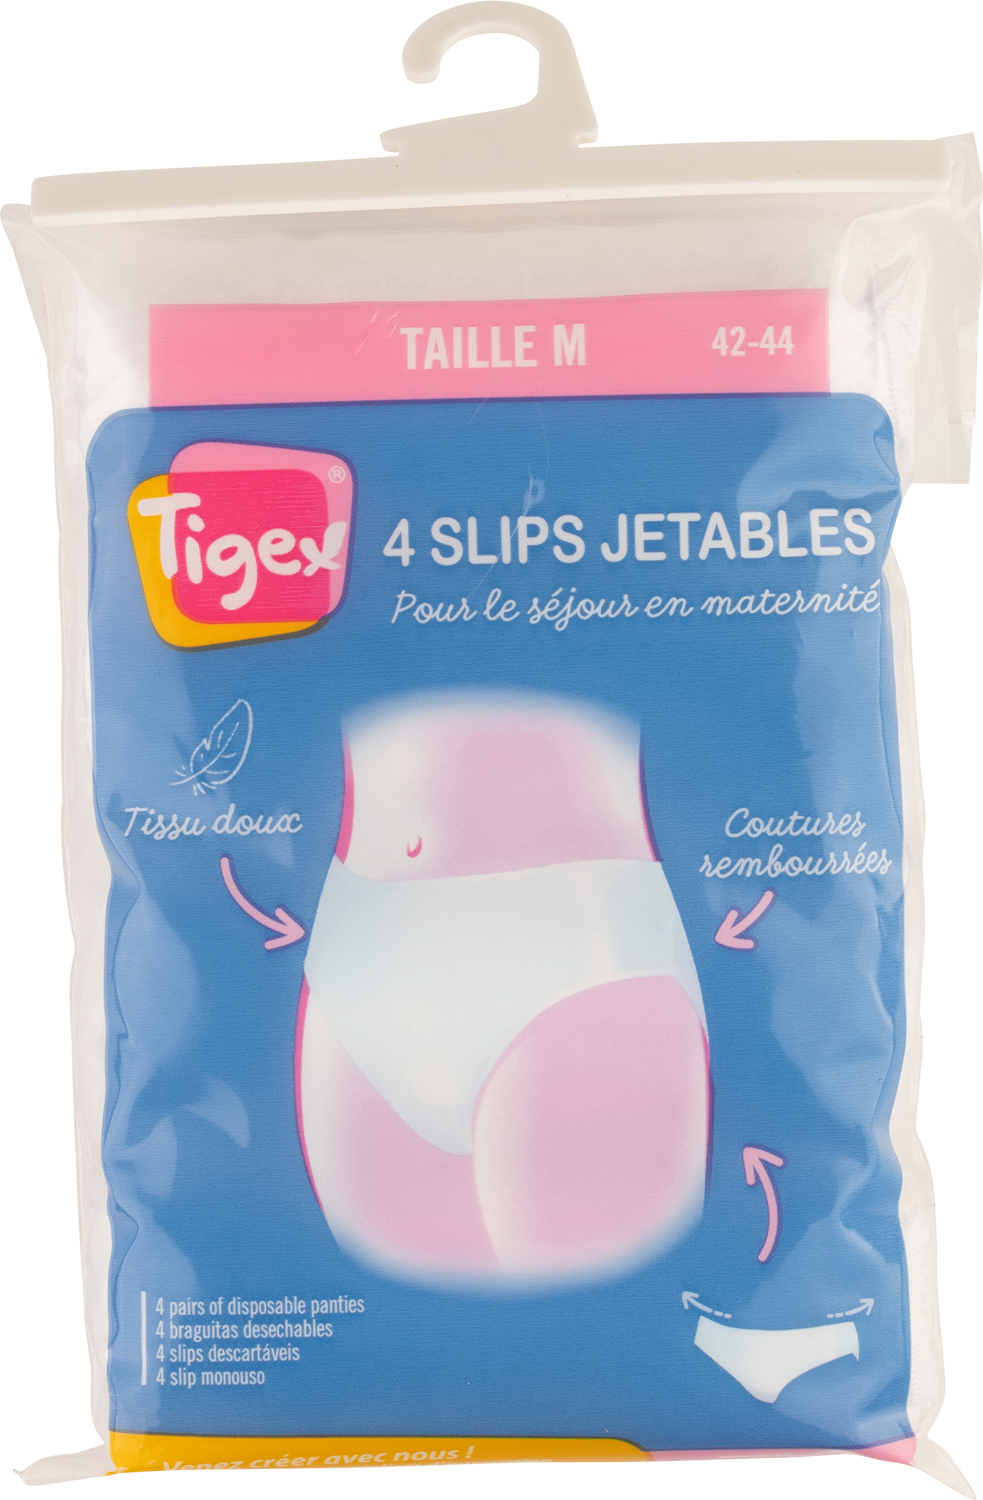 4 slips jetables blancs - Taille M - Tigex